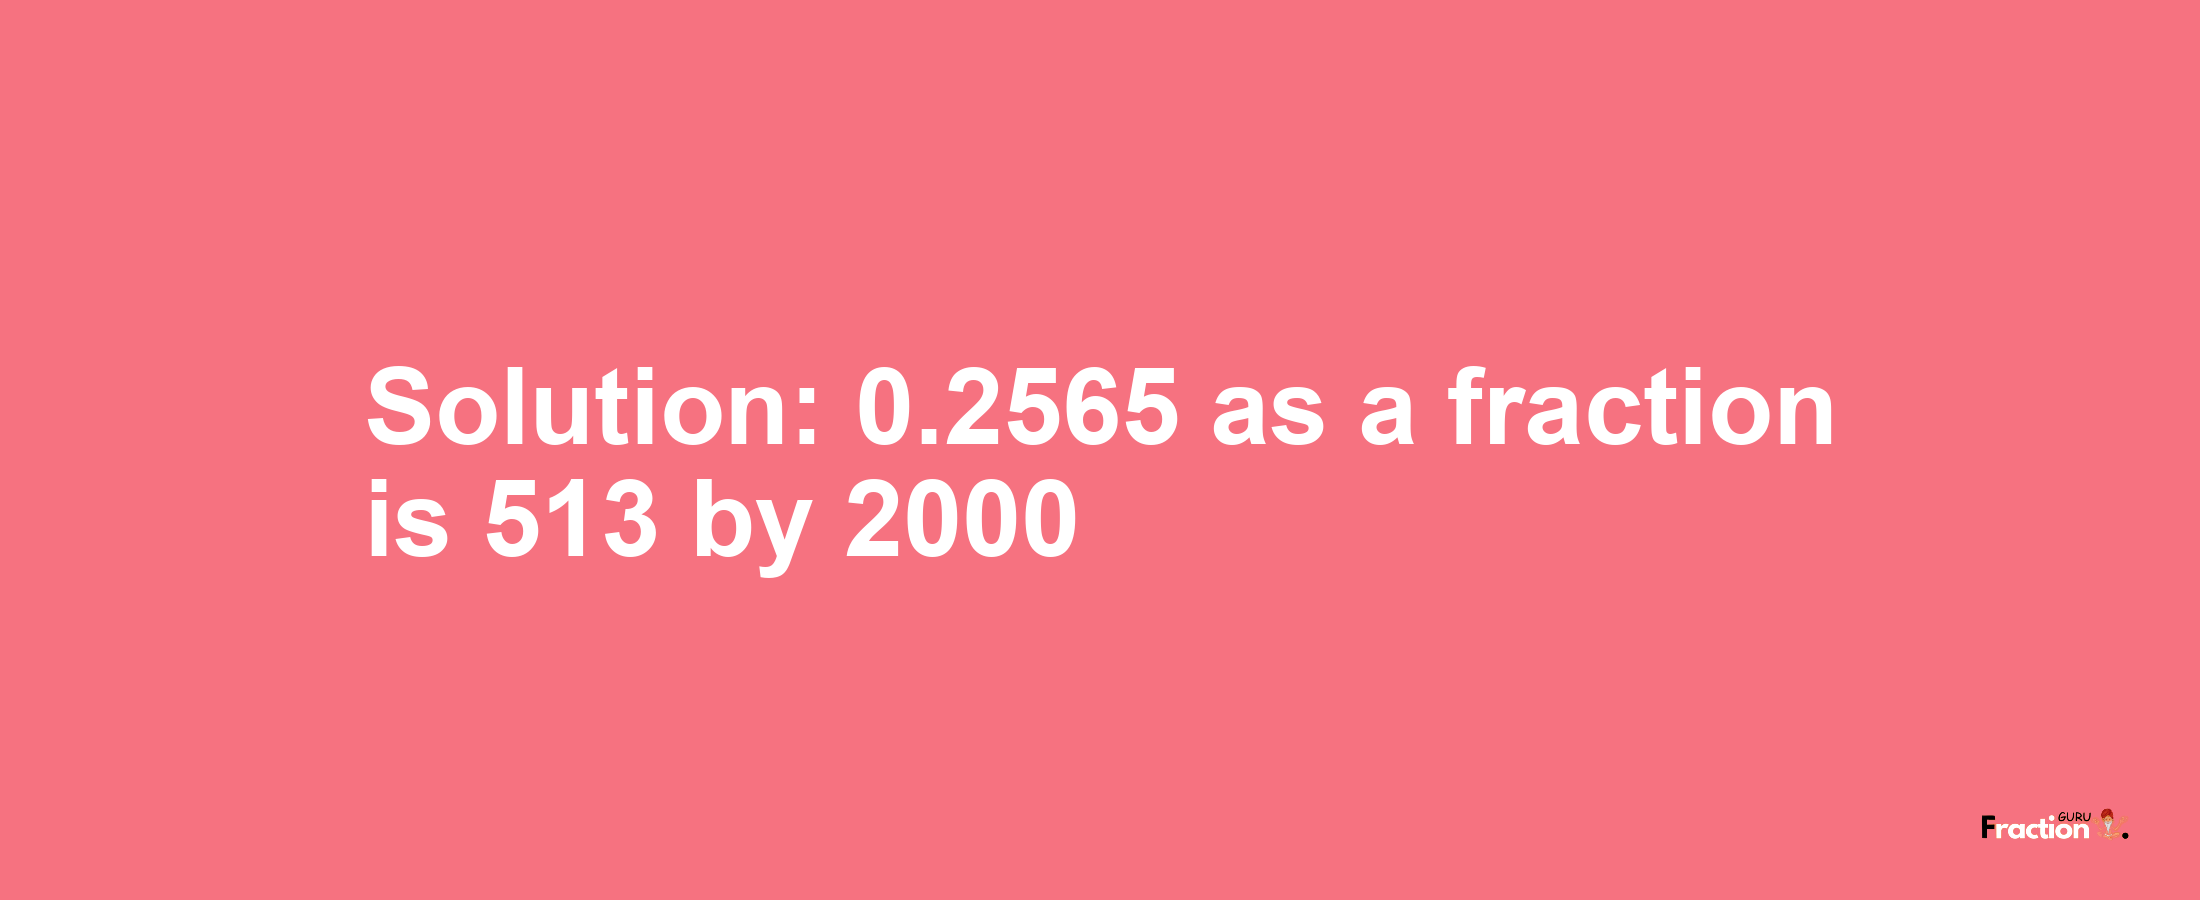 Solution:0.2565 as a fraction is 513/2000